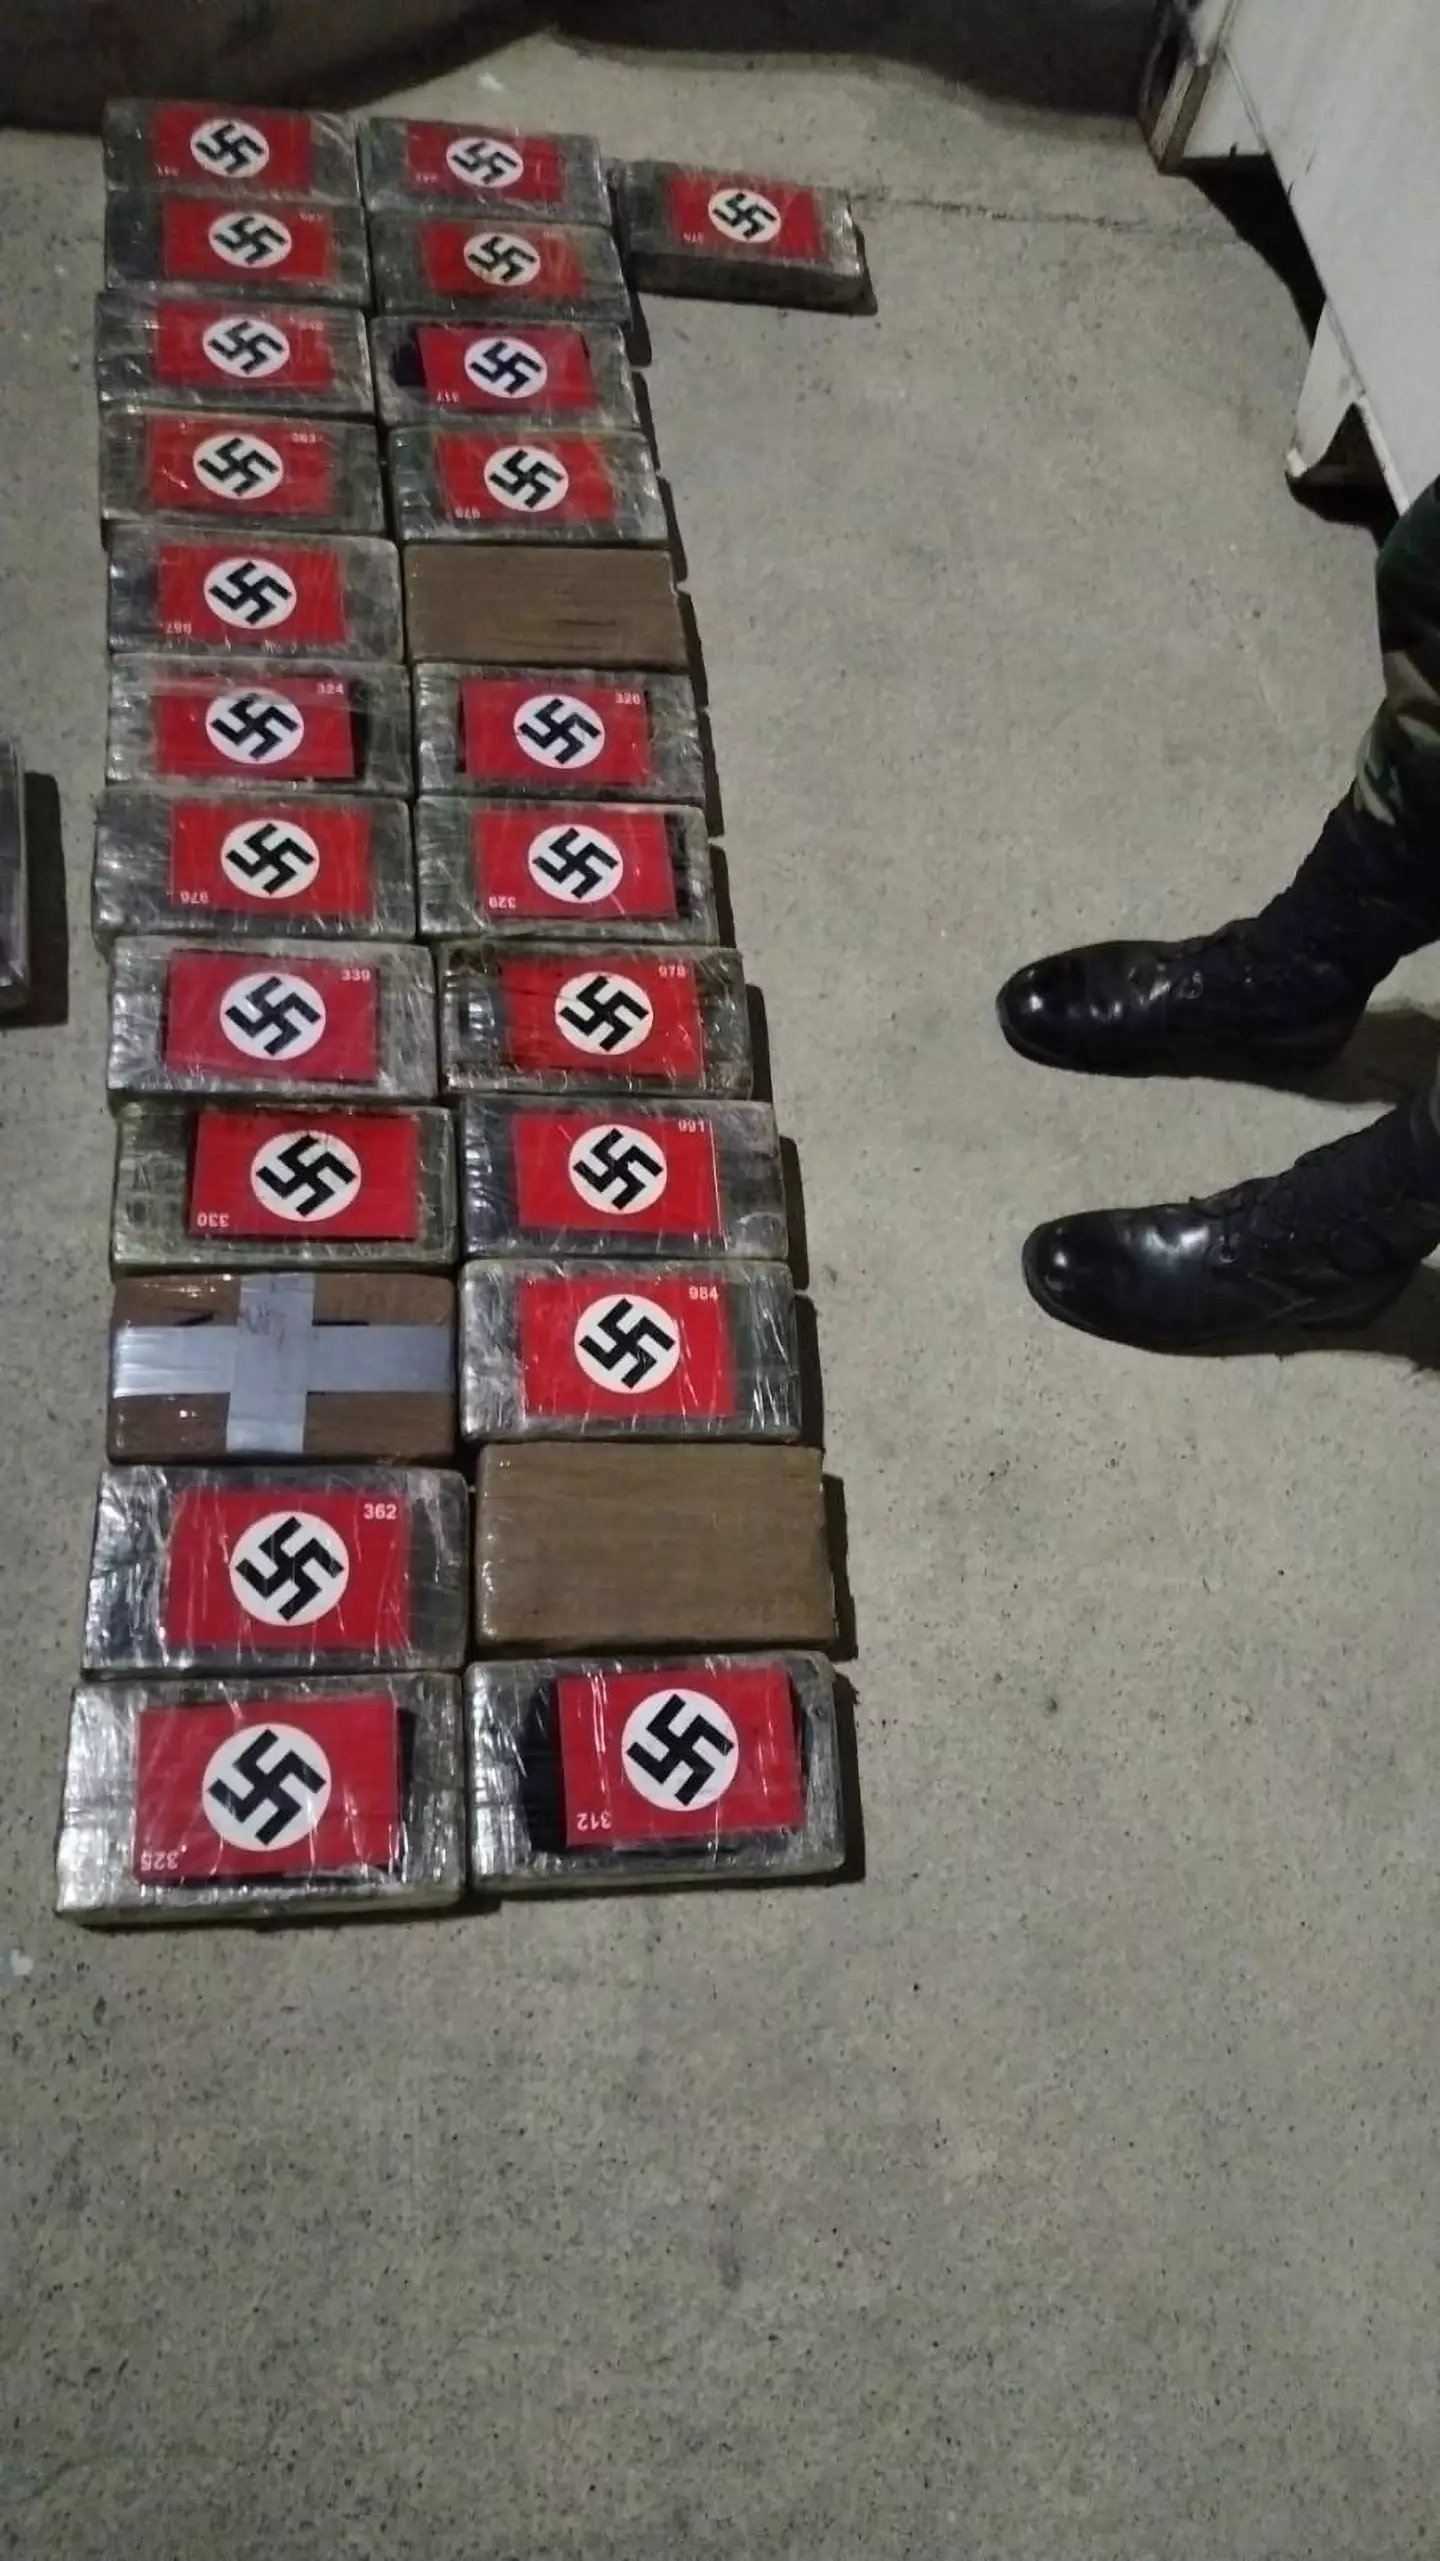 Each brick of cocaine was adorned with a red, white and black Nazi swastika flag.